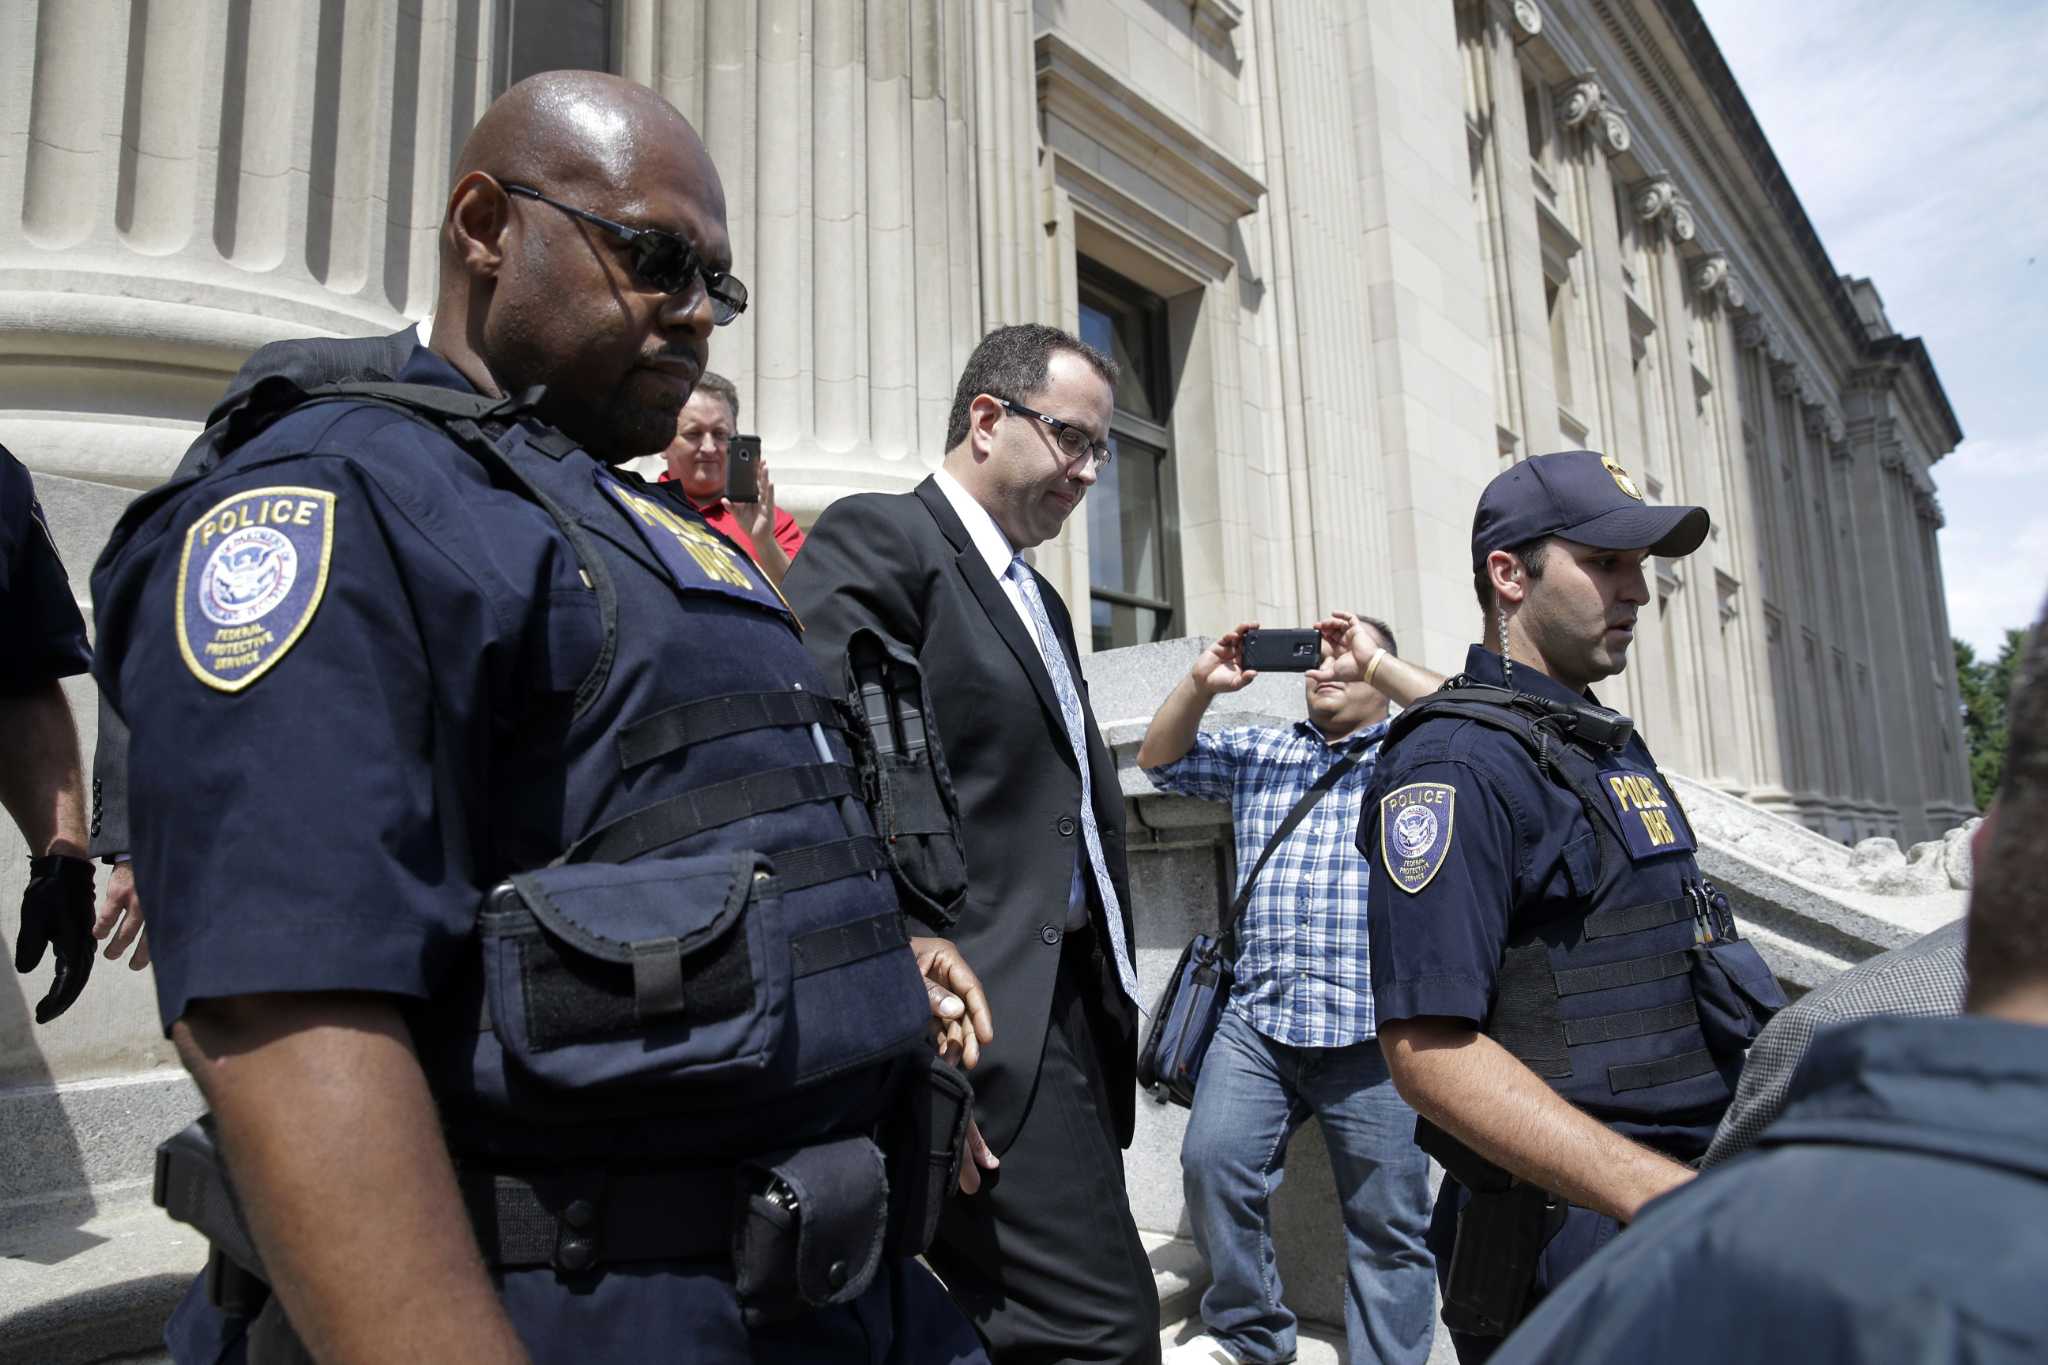 Prosecutor Ex-Subway pitchman Jared Fogle paid kids for sex on business trips